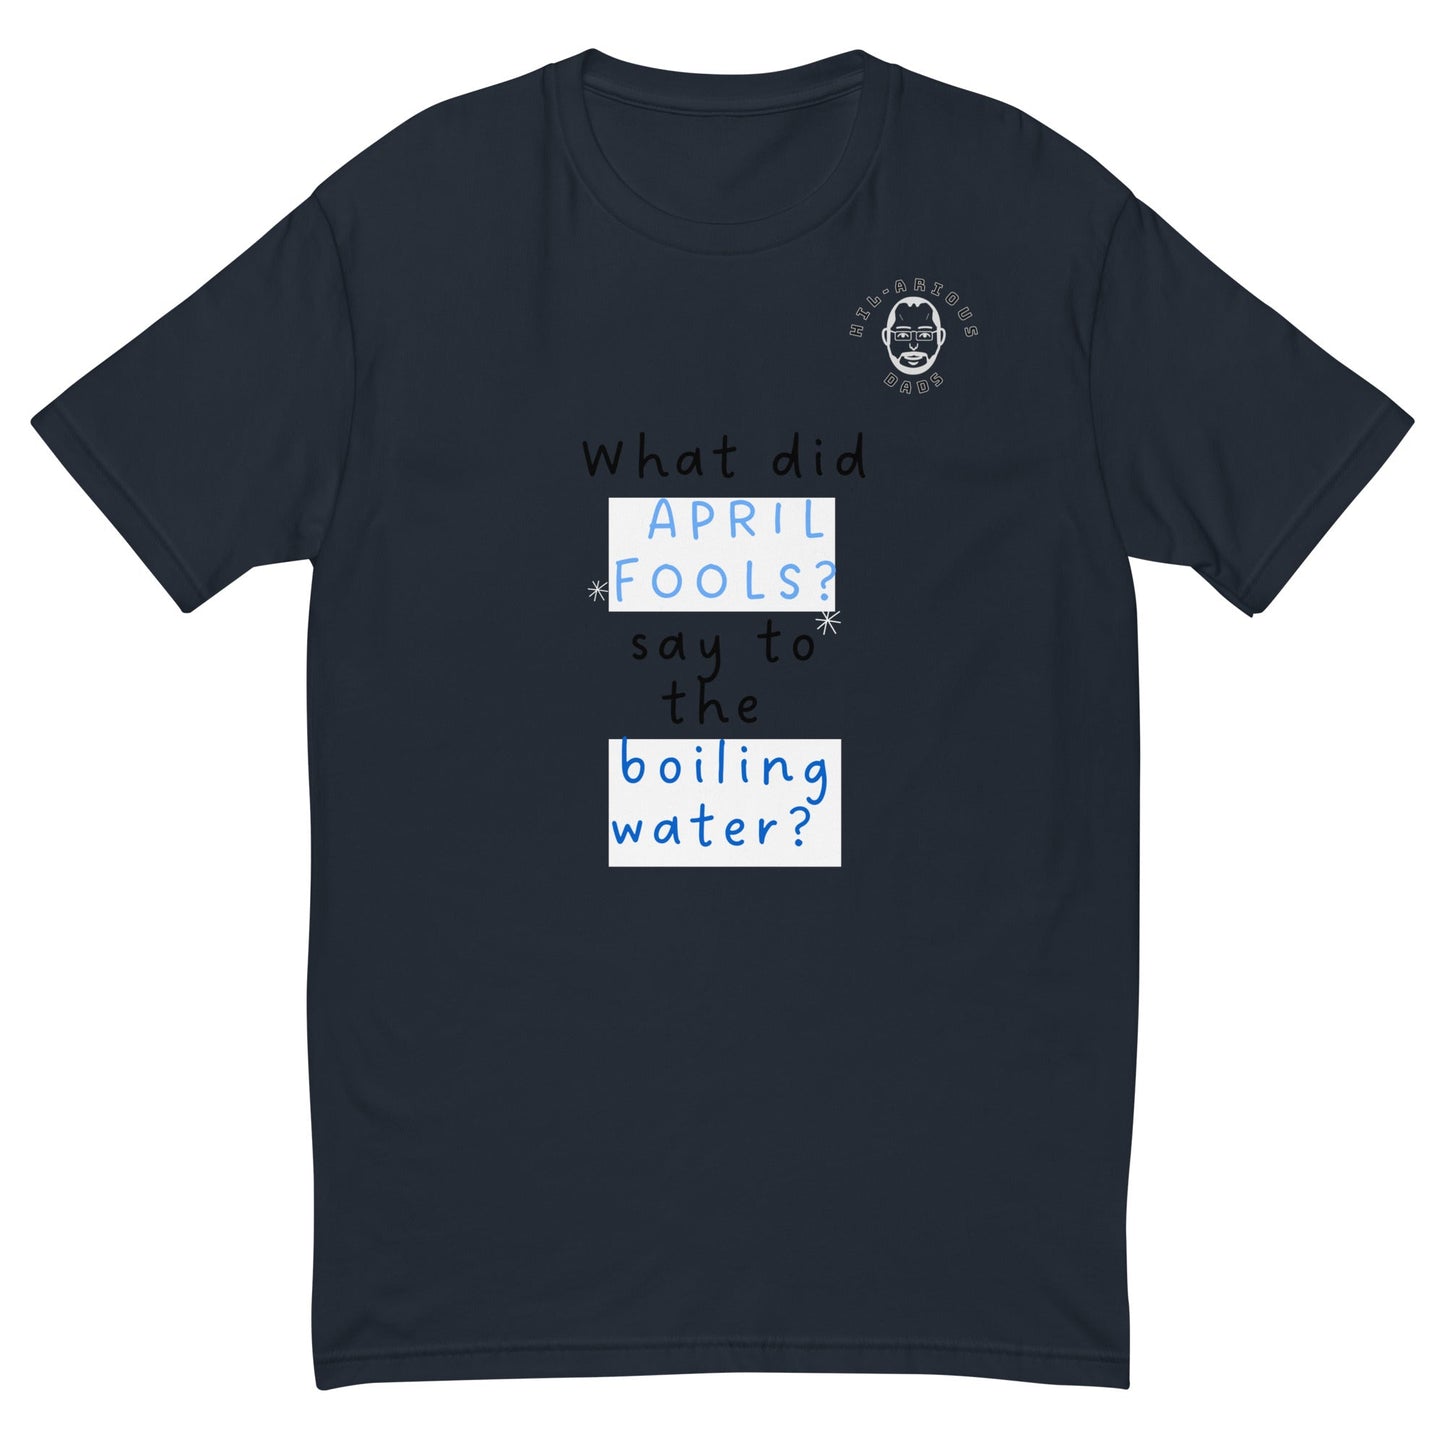 What did April Fools say to the boiling water?-T-shirt - Hil-arious Dads